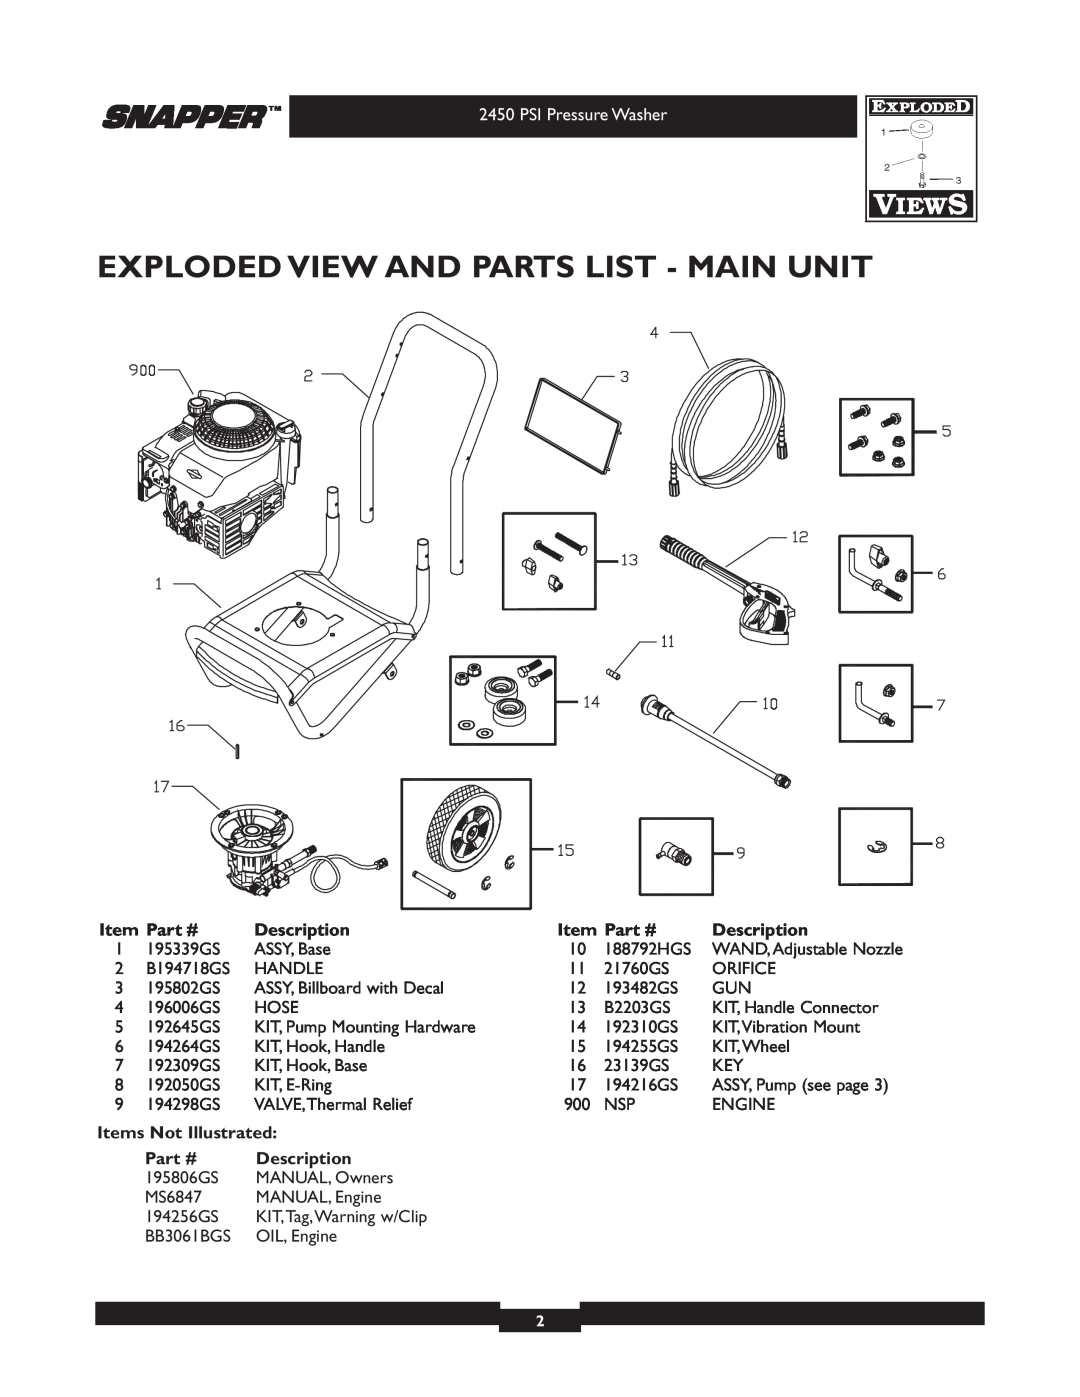 Snapper 20229 manual Exploded View And Parts List - Main Unit, PSI Pressure Washer, Description, Items Not Illustrated 